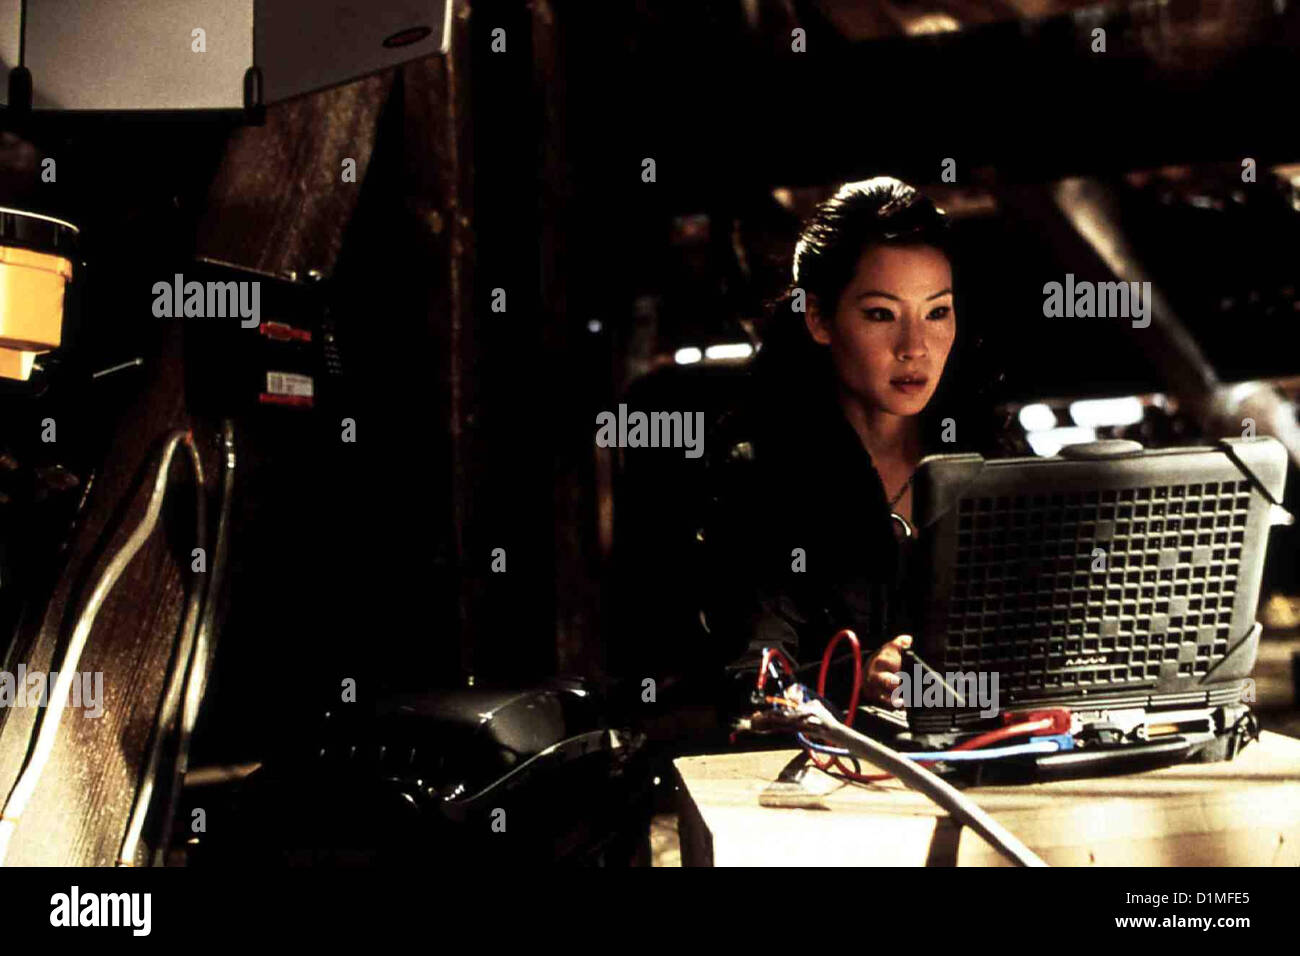 3 Engel Fuer Charlie Charlie's Angels Lucy Liu Alex (Lucy Liu) *** légende locale *** 2000 Columbia TriStar Banque D'Images